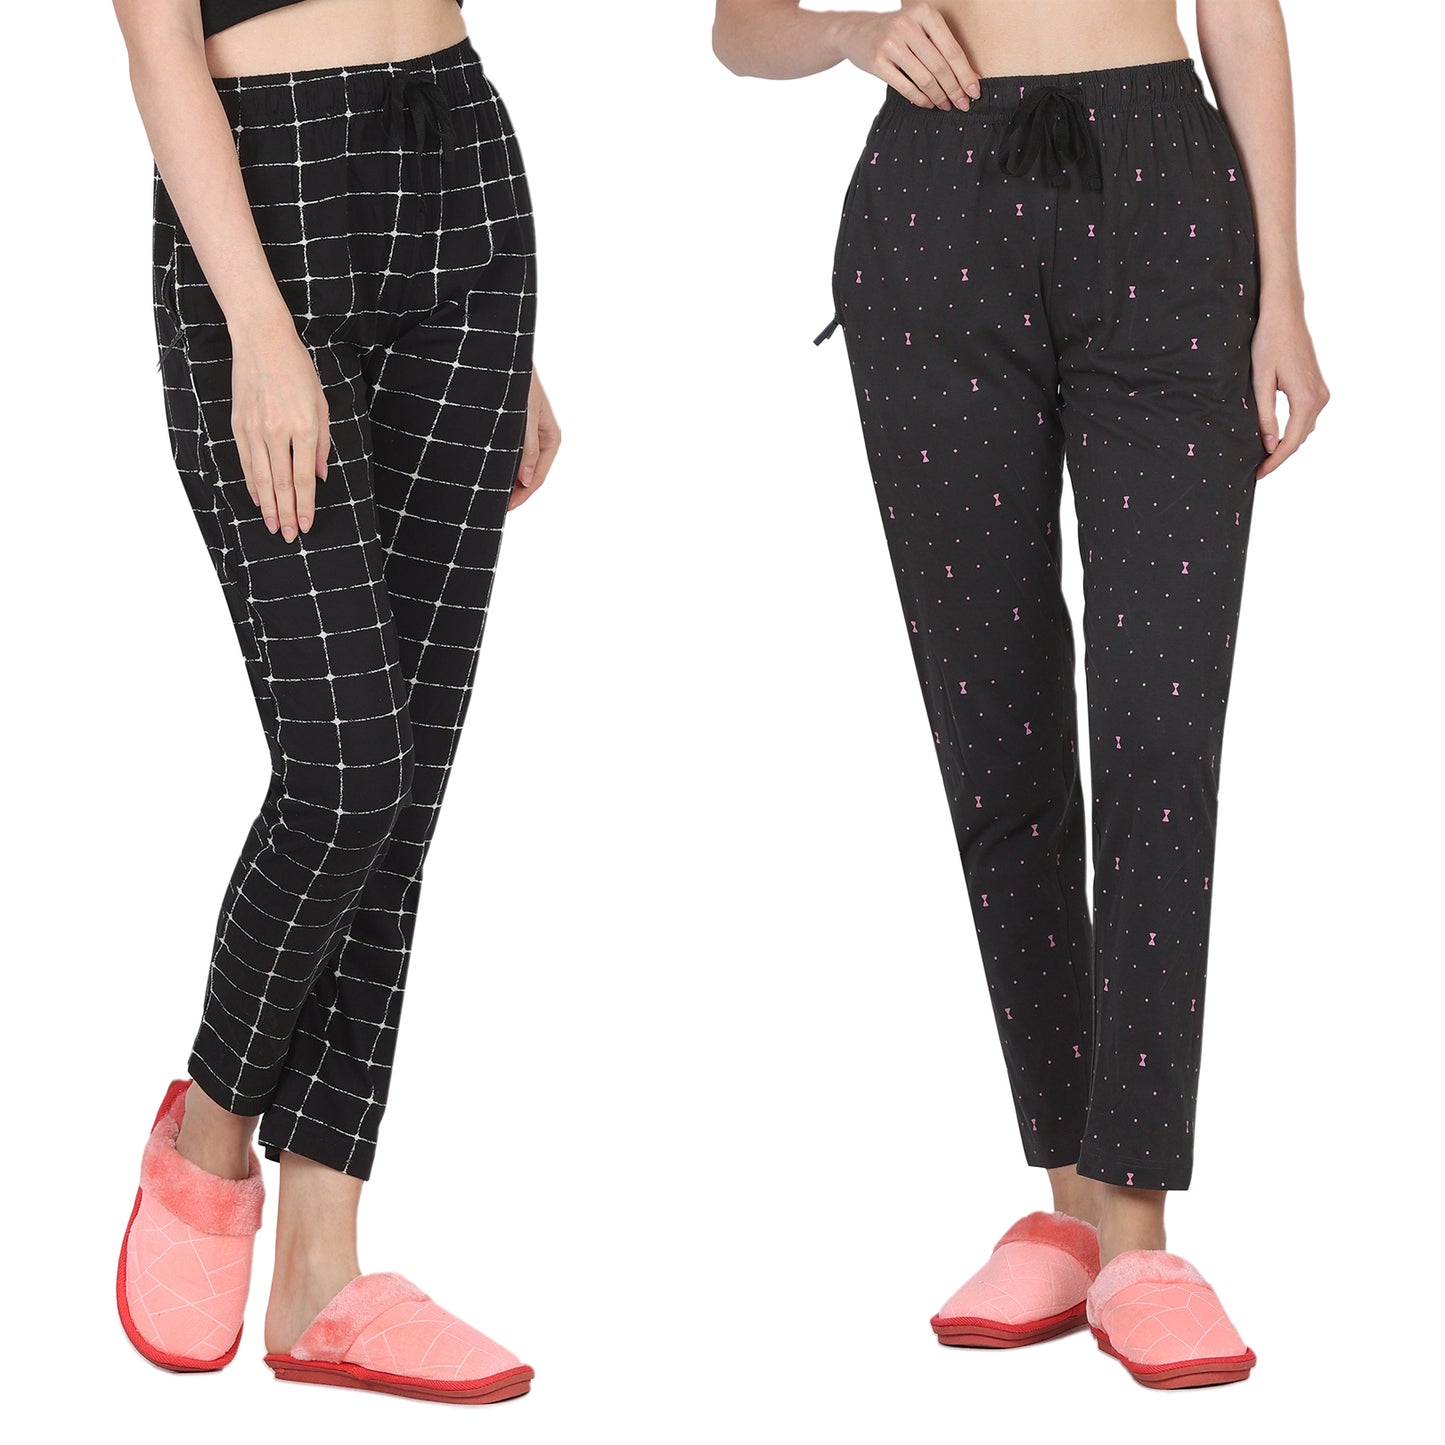 Eazy Women's Printed Lower - Pack of 2 - Black & Charcoal Grey